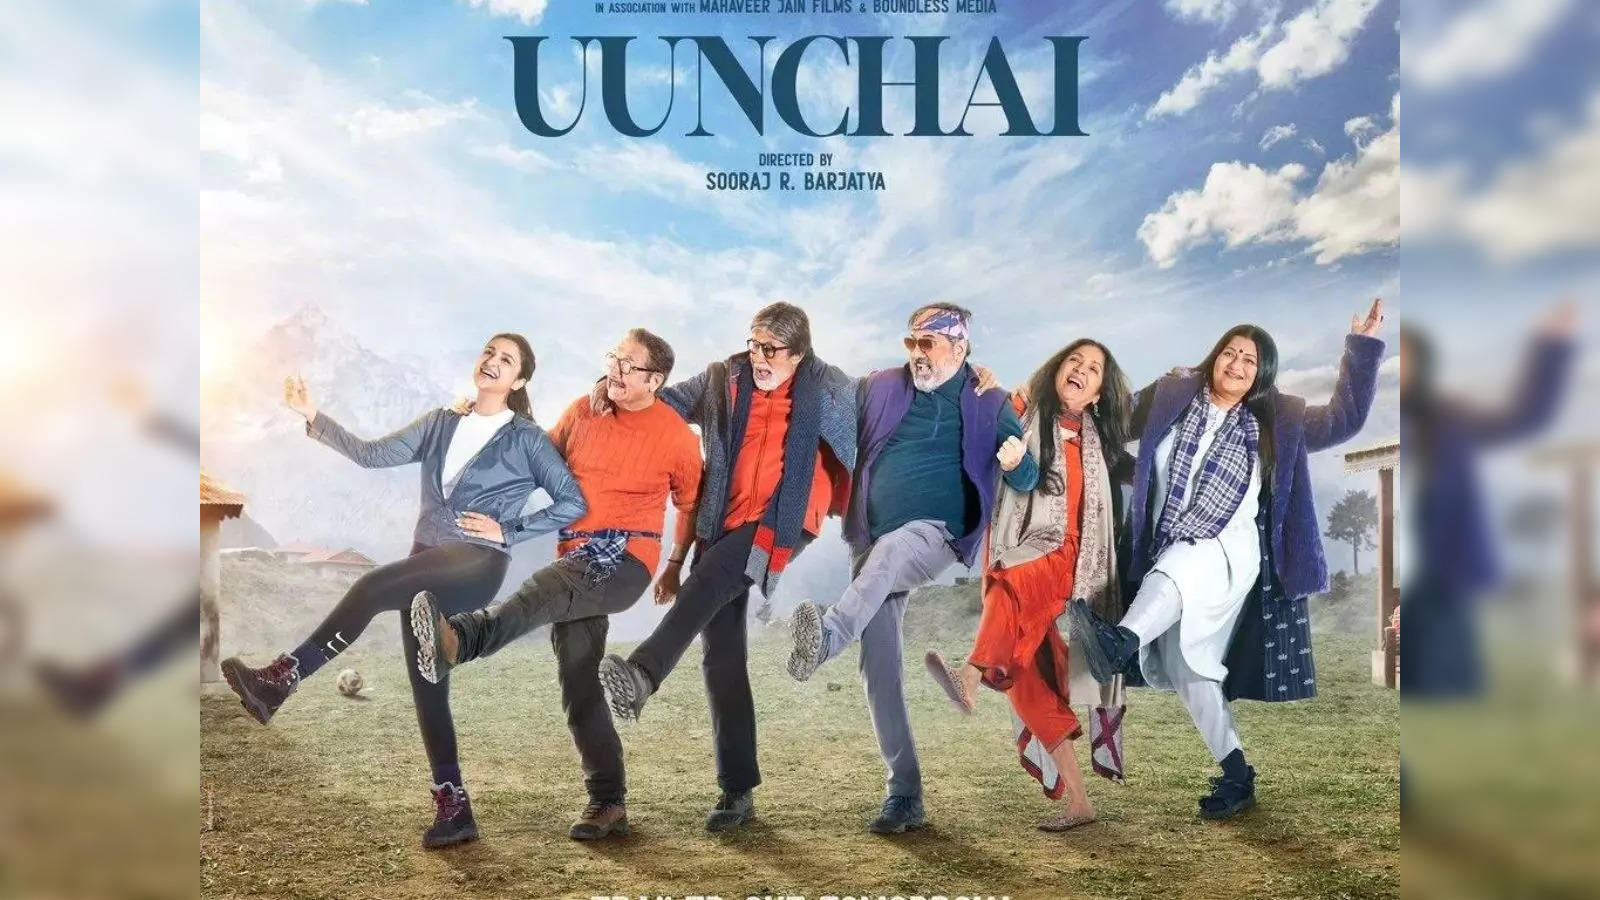 Uunchai Ott Release: 'Uunchai' OTT release: When and where to watch Amitabh  Bachchan, Anupam Kher and Boman Irani-starrer drama - The Economic Times